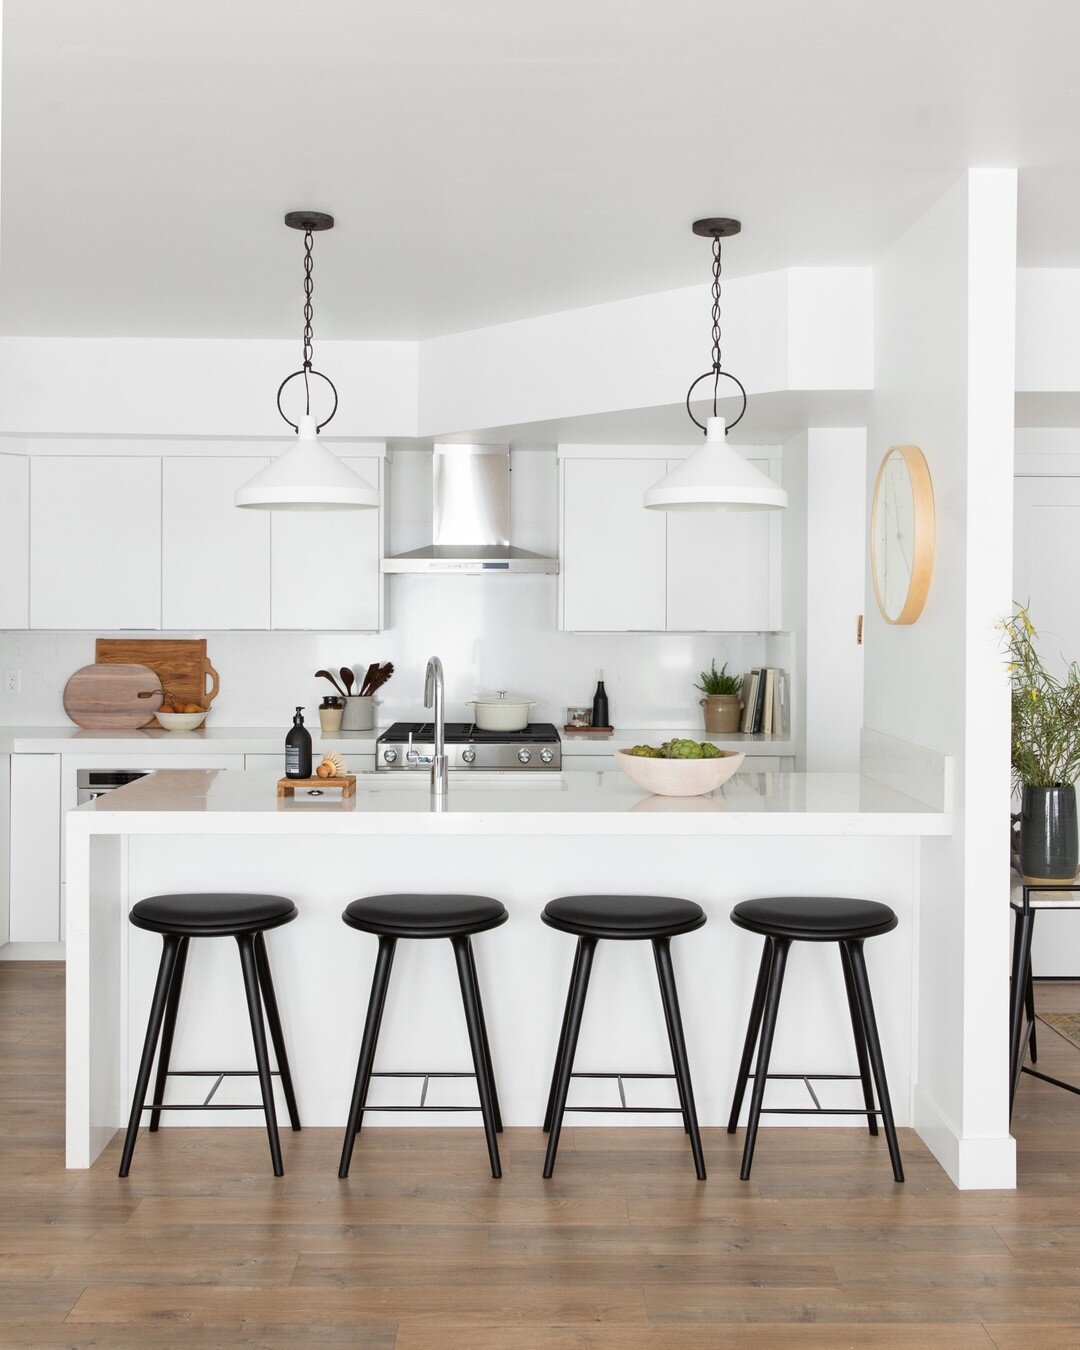 We love how this kitchen captured the clean, modern aesthetic our client wanted to incorporate. Can&rsquo;t get over the pendants and stools we added to elevate their spec kitchen design! ⠀⠀⠀⠀⠀⠀⠀⠀⠀
&bull; ⠀⠀⠀⠀⠀⠀⠀⠀⠀
&bull;⠀⠀⠀⠀⠀⠀⠀⠀⠀
&bull;⠀⠀⠀⠀⠀⠀⠀⠀⠀
&bu